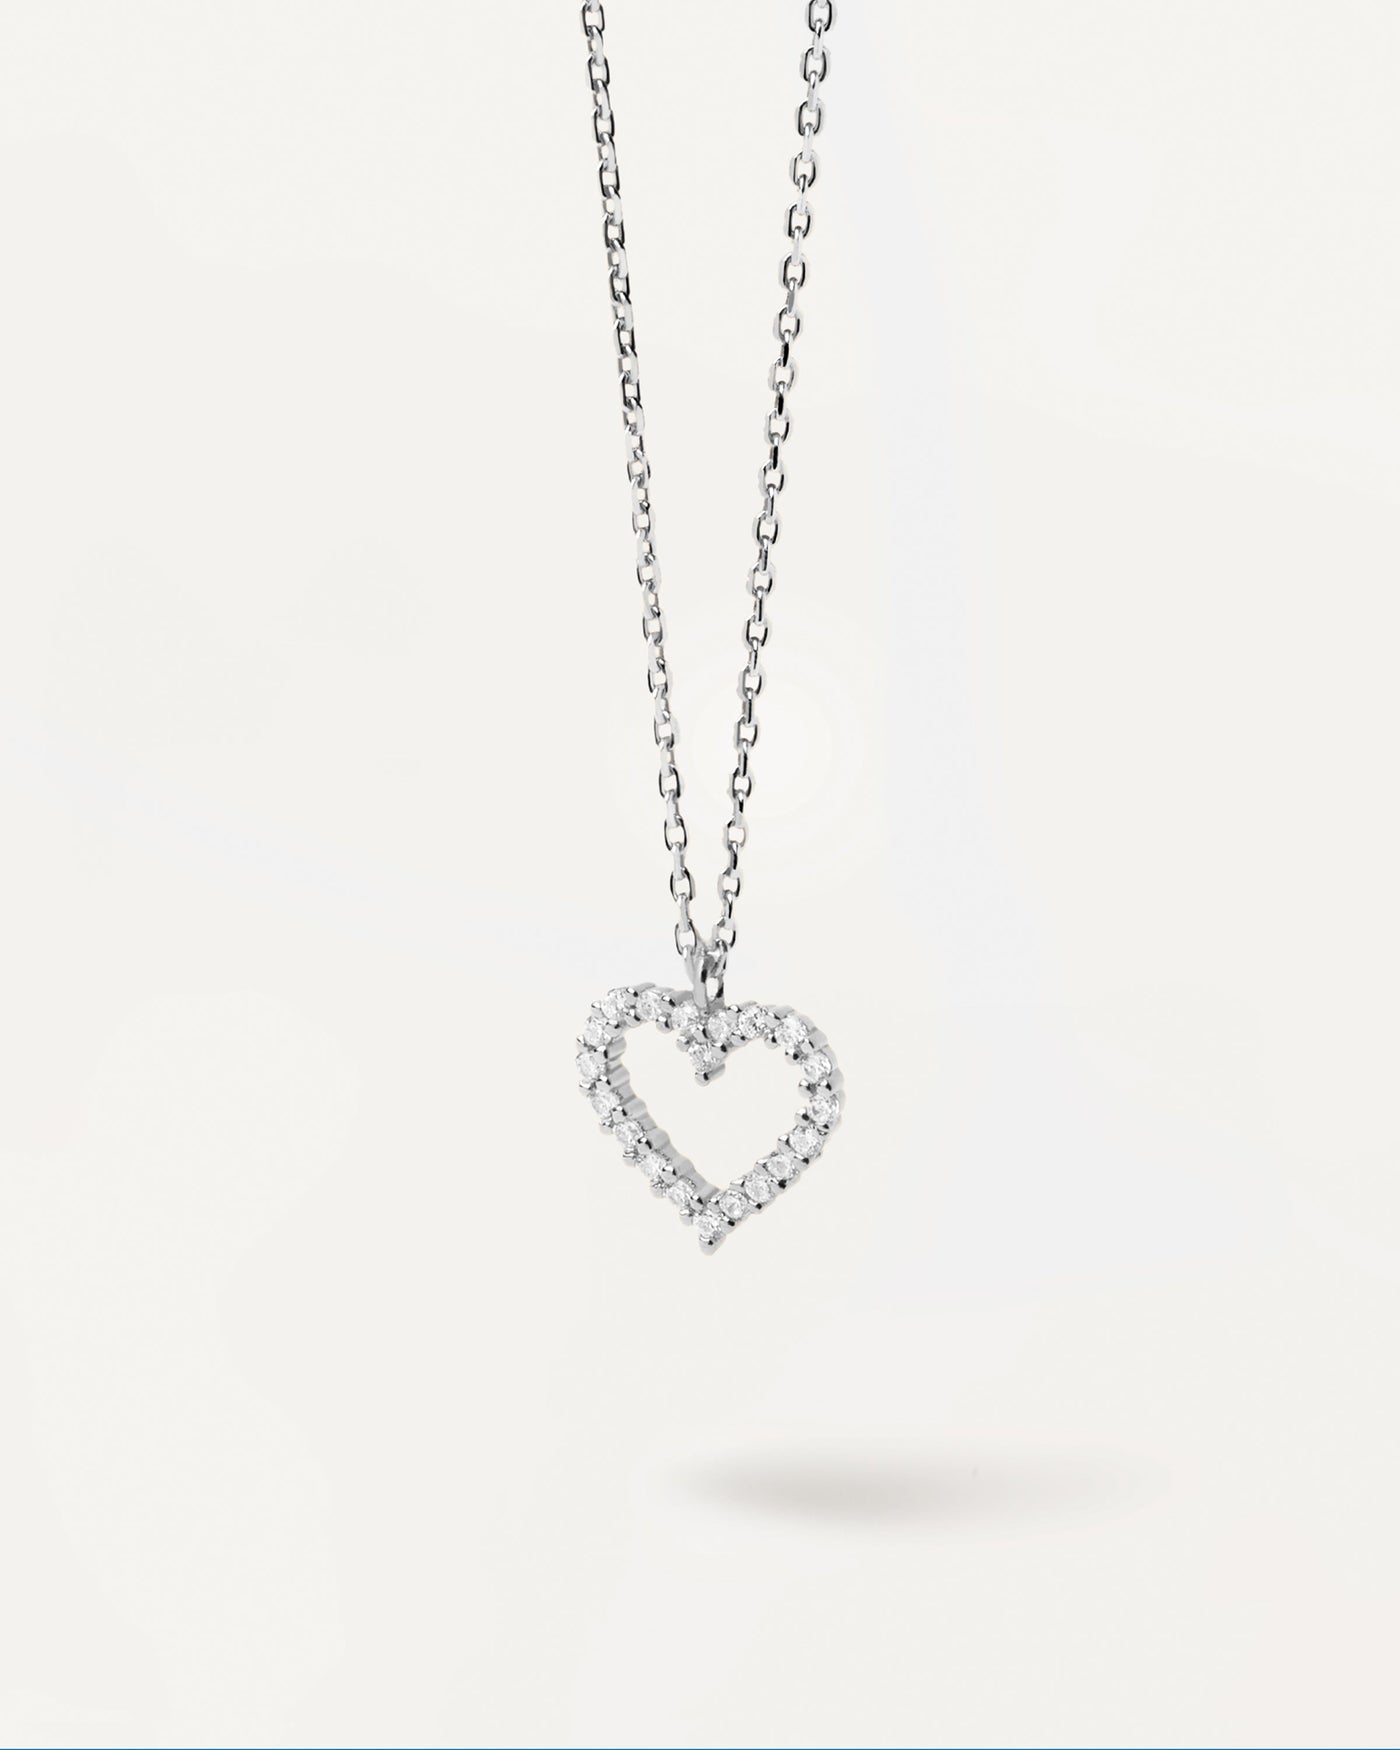 2023 Selection | White Heart Necklace Silver. Heart pendant set with white zirconia stones on a sterling single link chain necklace. Get the latest arrival from PDPAOLA. Place your order safely and get this Best Seller. Free Shipping.